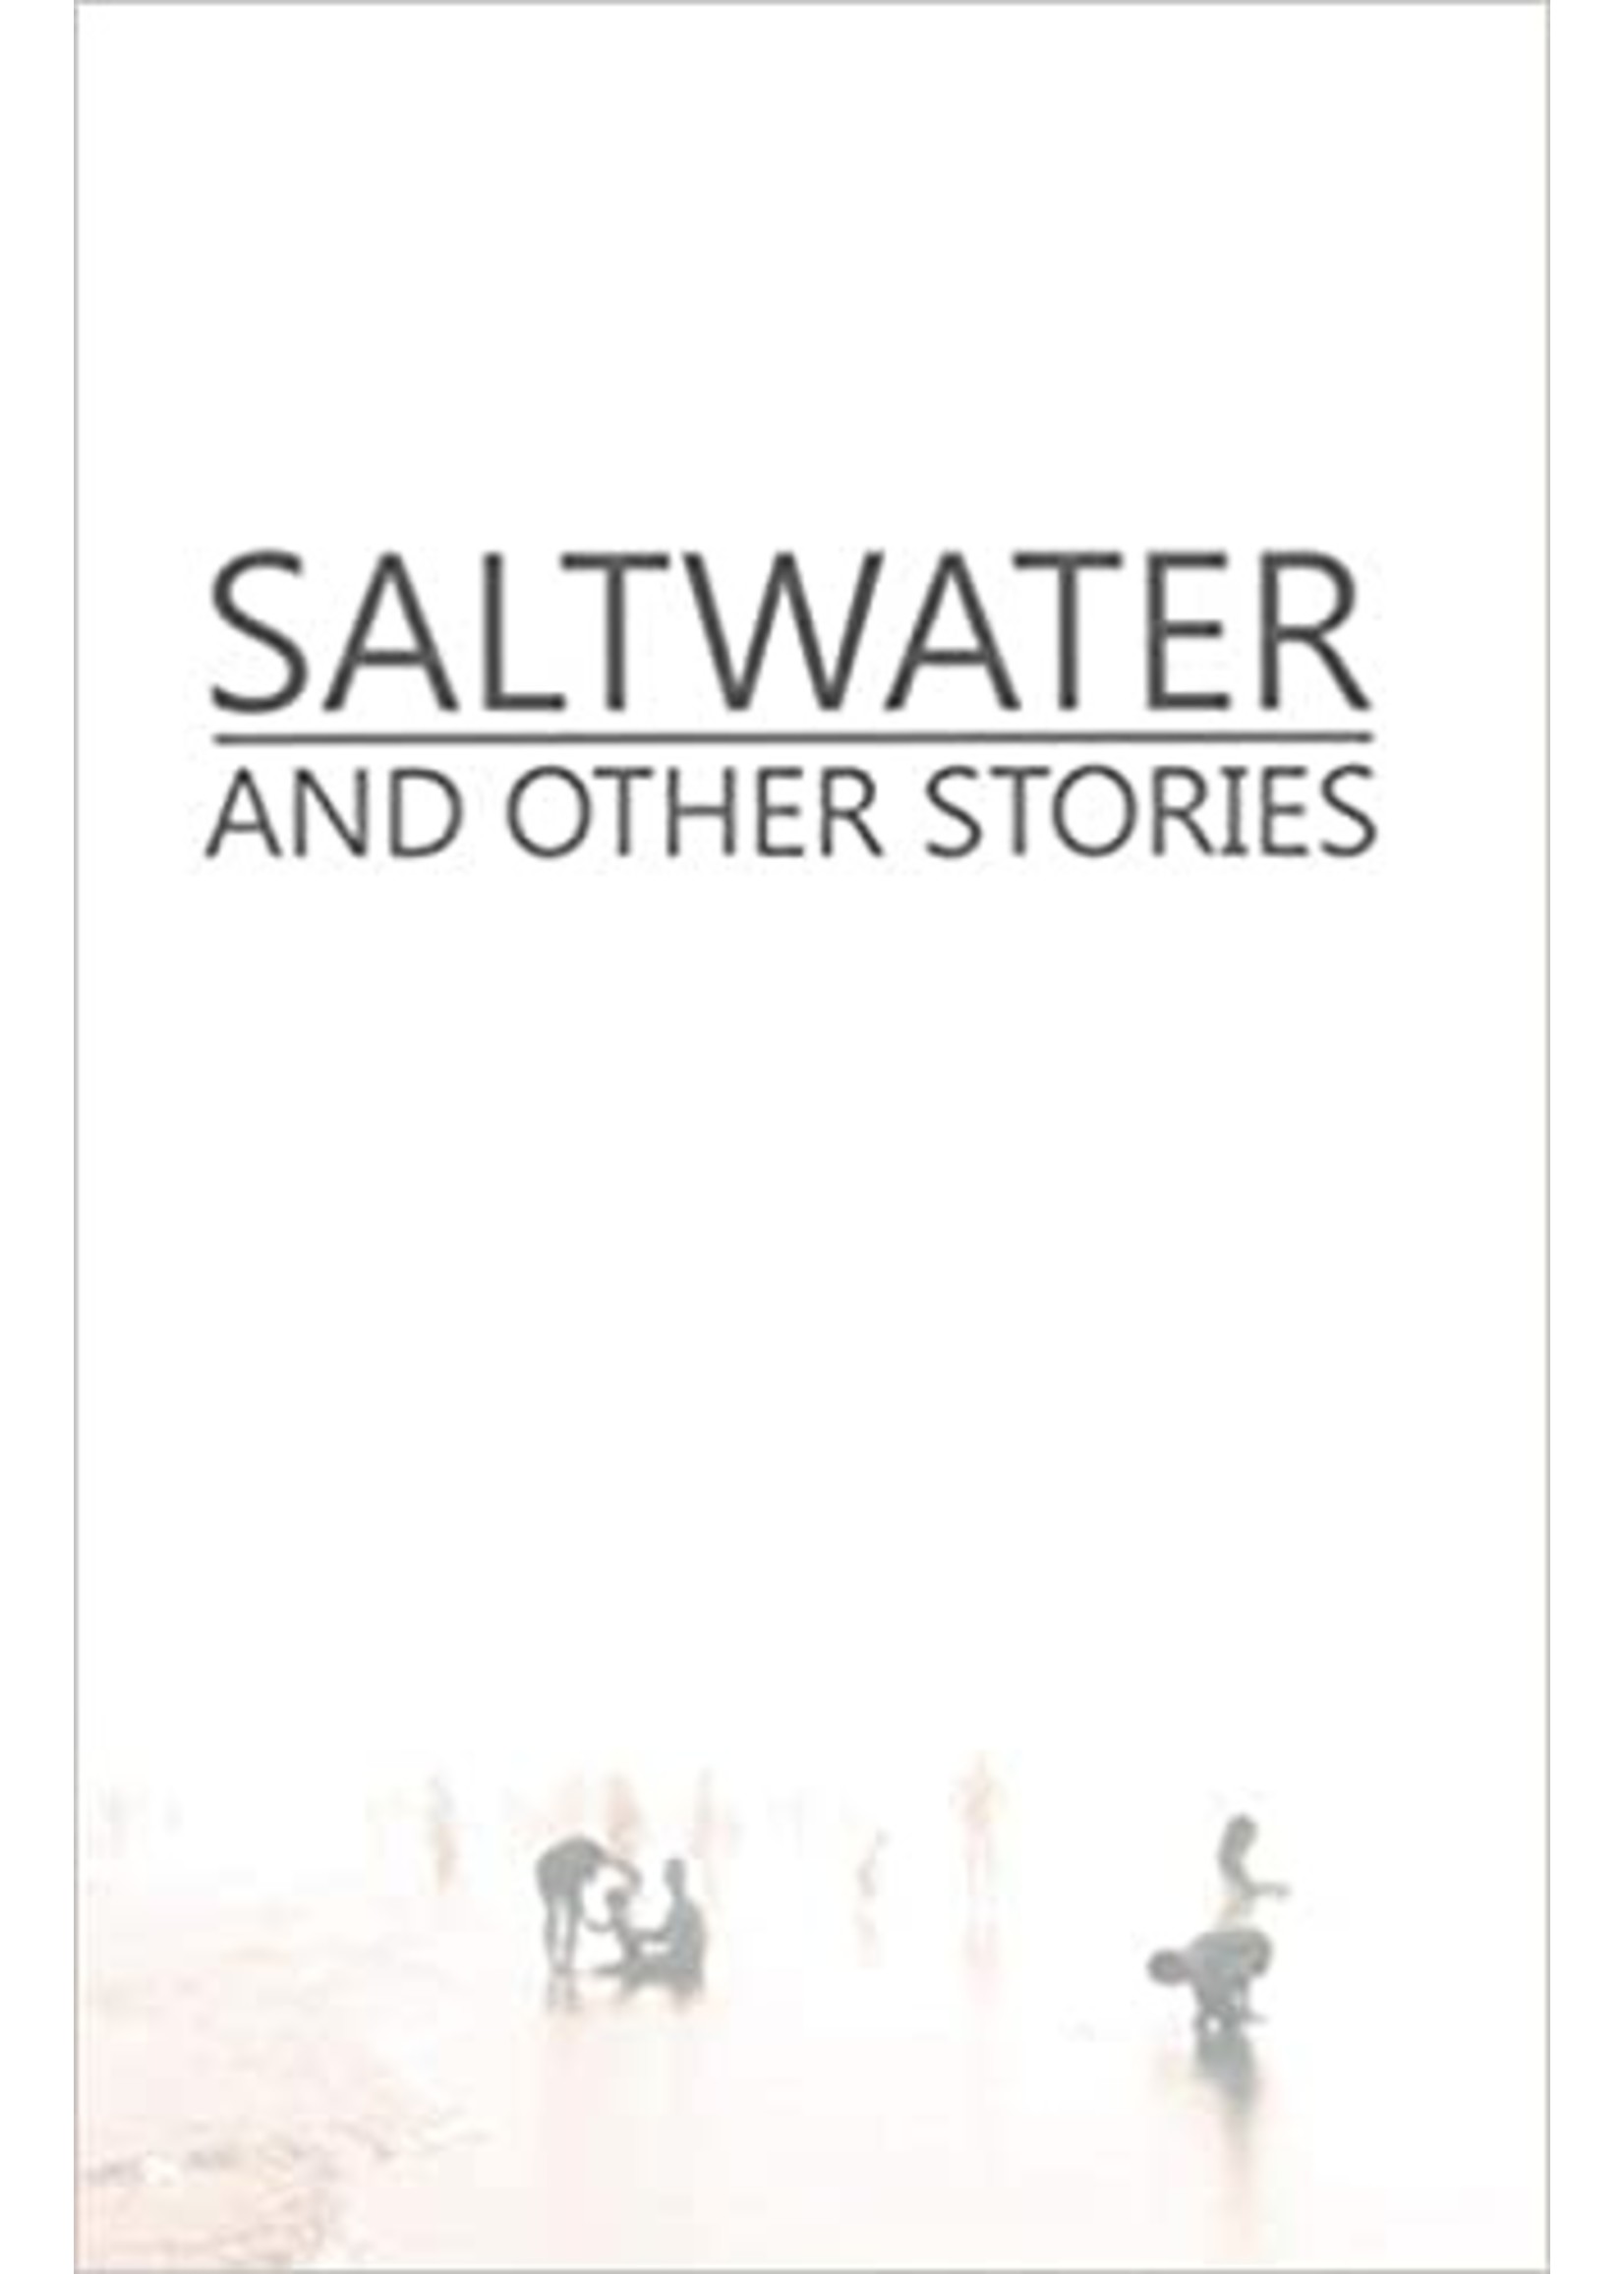 Saltwater and Other Stories by DJ Wiseman